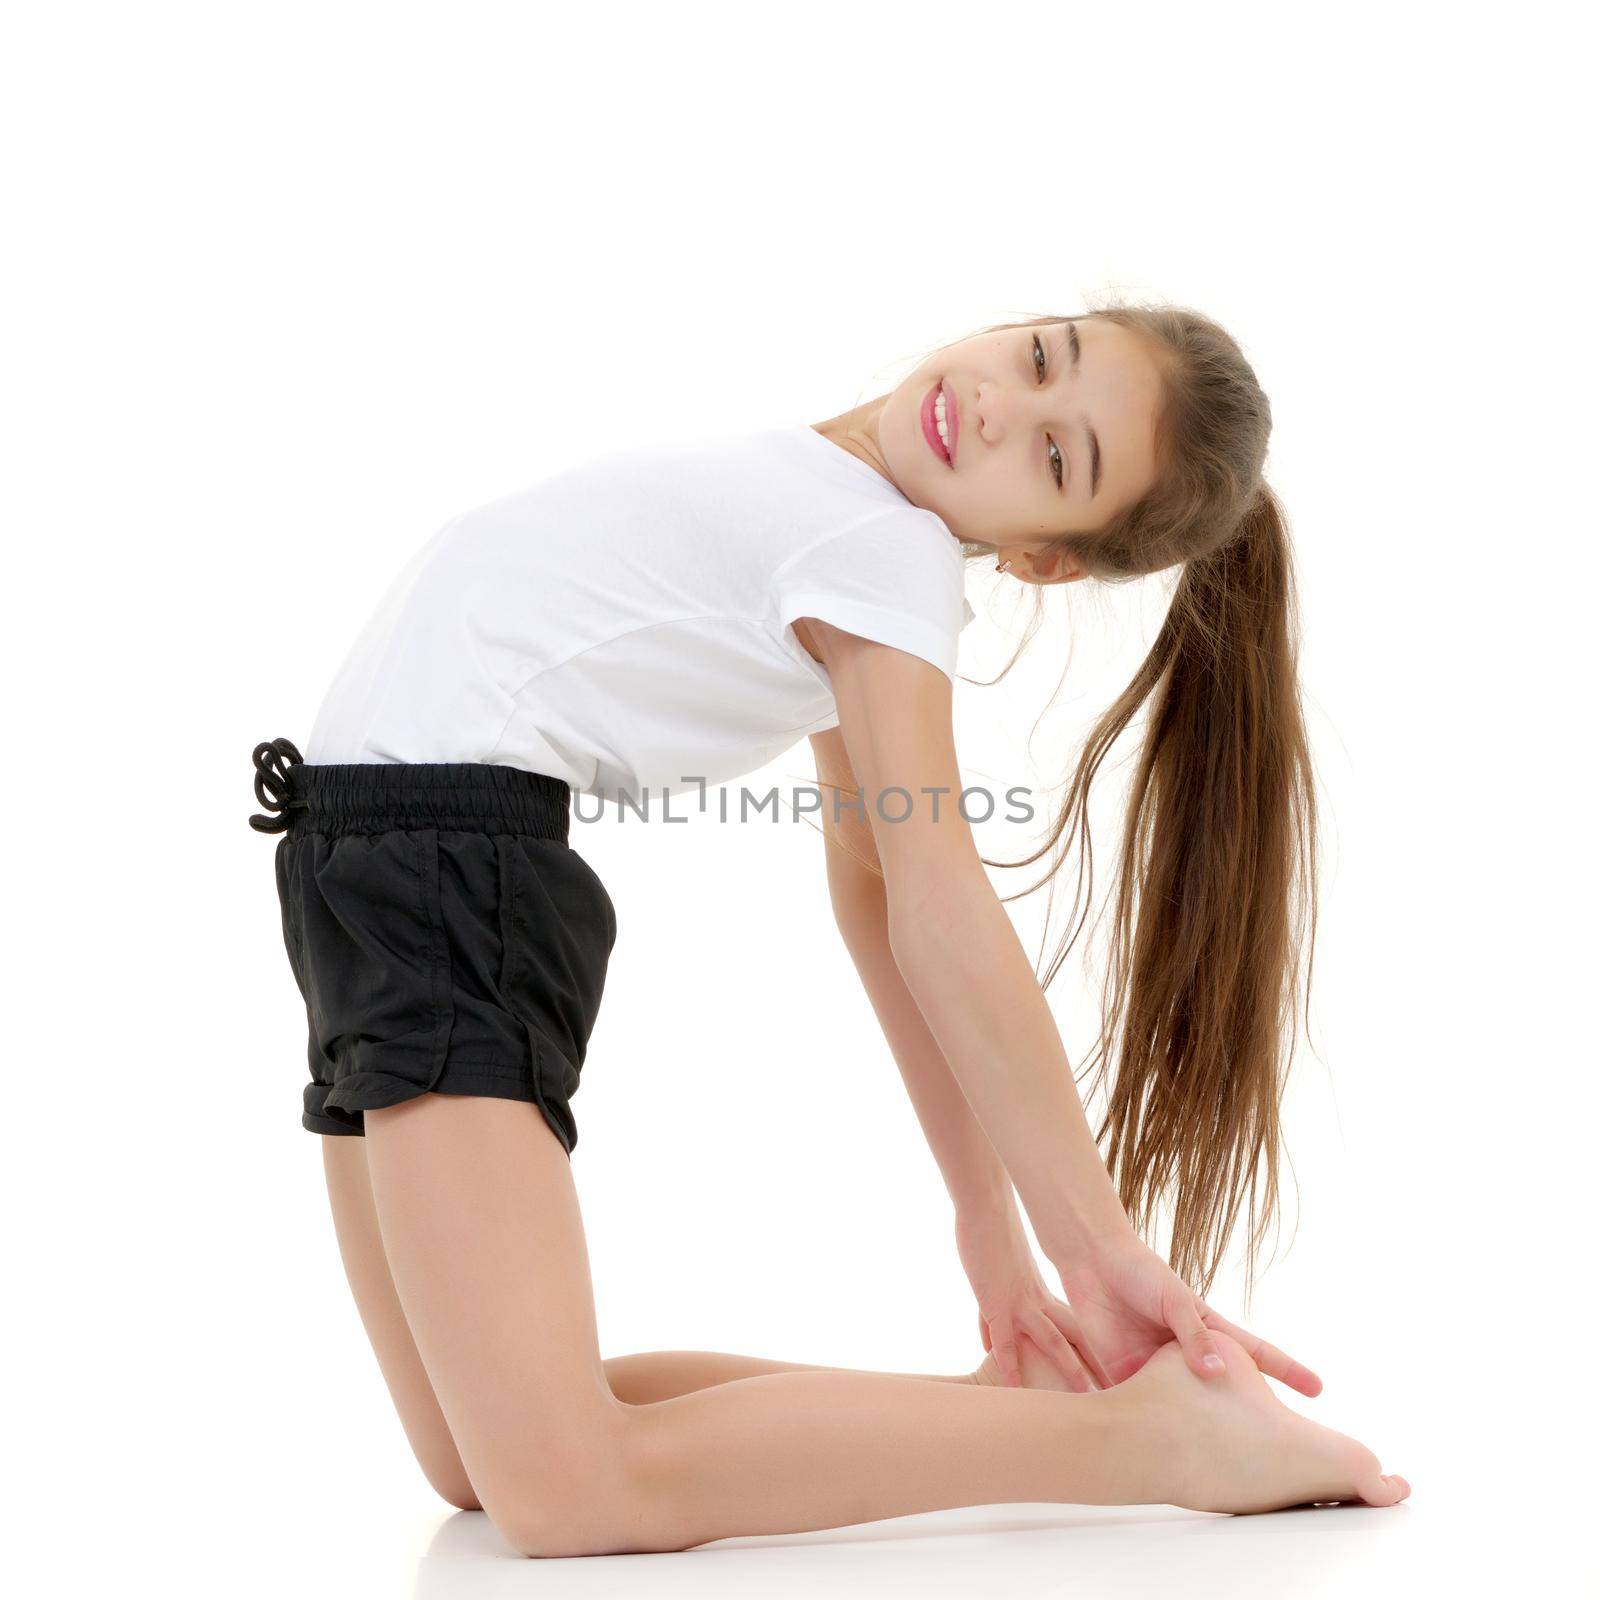 A gymnast girl prepares for the exercise. The concept of childhood and sport, a healthy lifestyle. Isolated on white background.